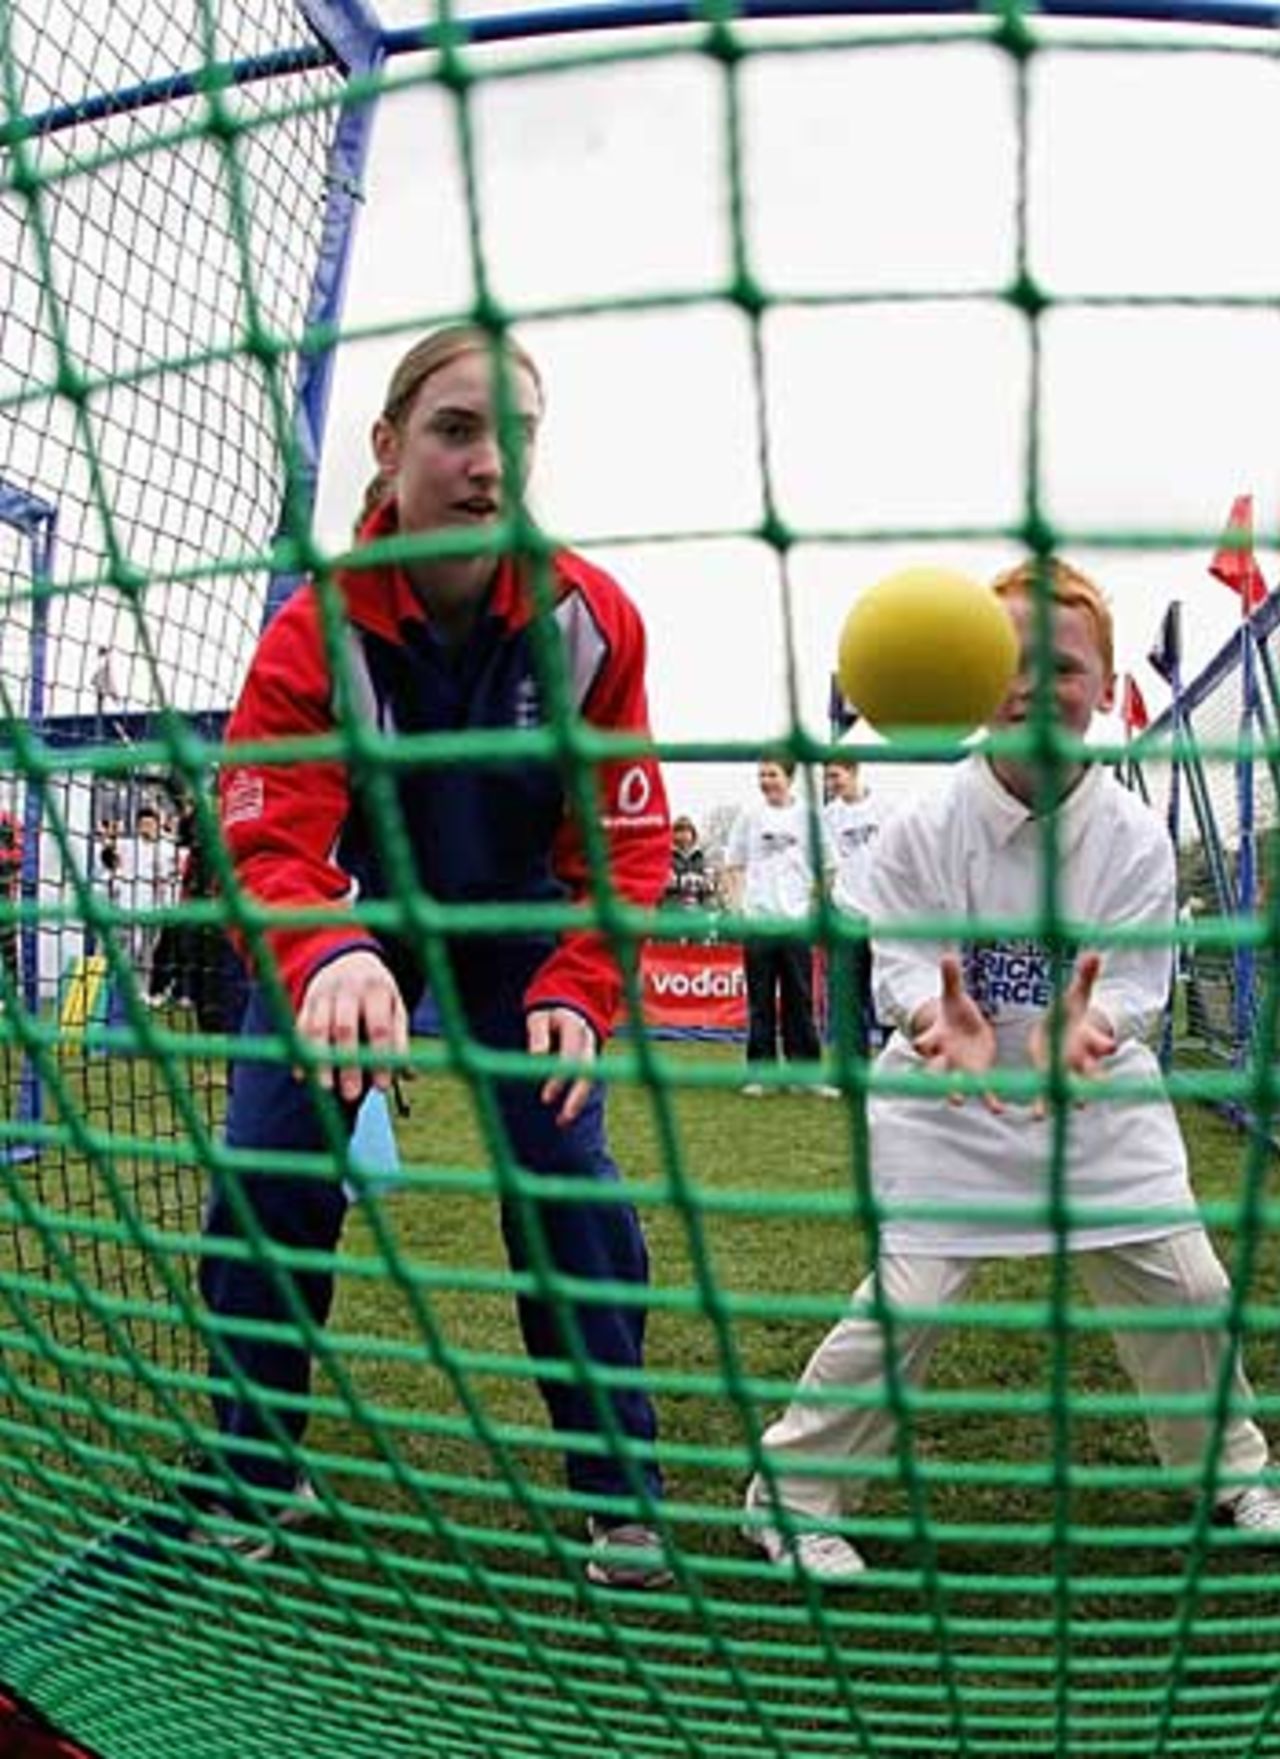 Beth Morgan passes on her catching skills at the NatWest CricketForce 2006 event, Upminster Cricket Club, Essex, April 7, 2006